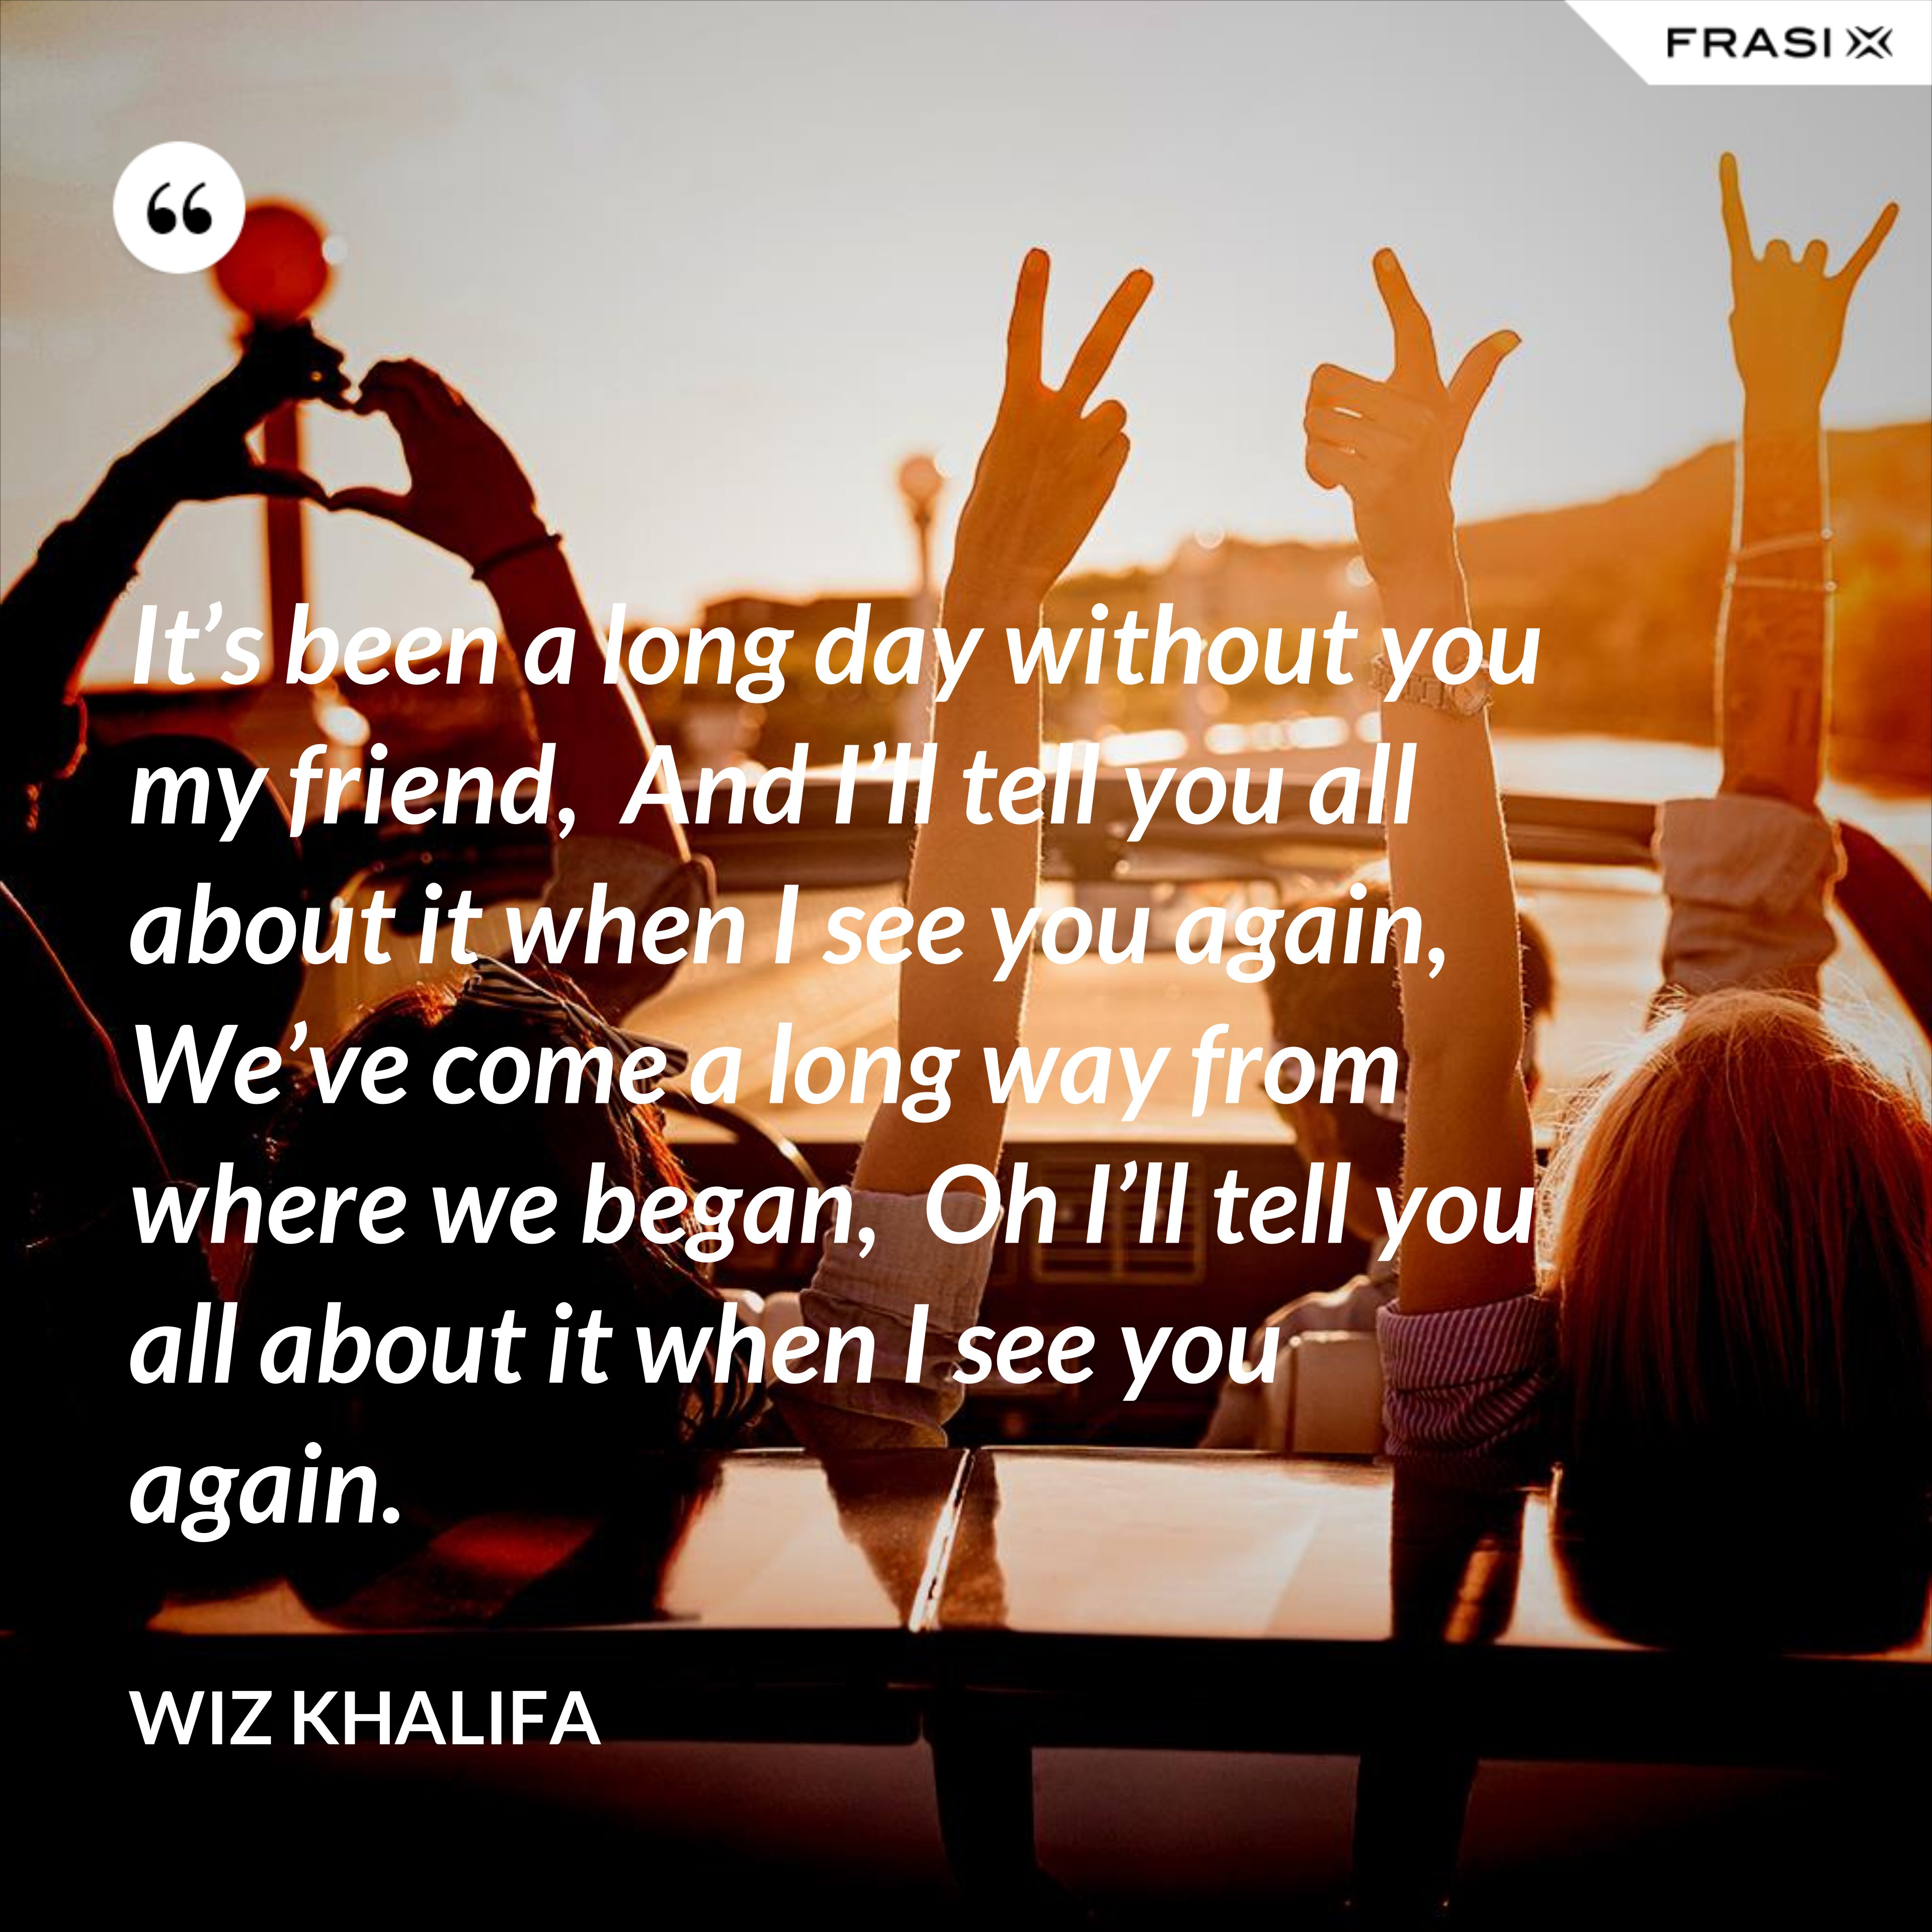 It’s been a long day without you my friend,  And I’ll tell you all about it when I see you again,  We’ve come a long way from where we began,  Oh I’ll tell you all about it when I see you again. - Wiz Khalifa